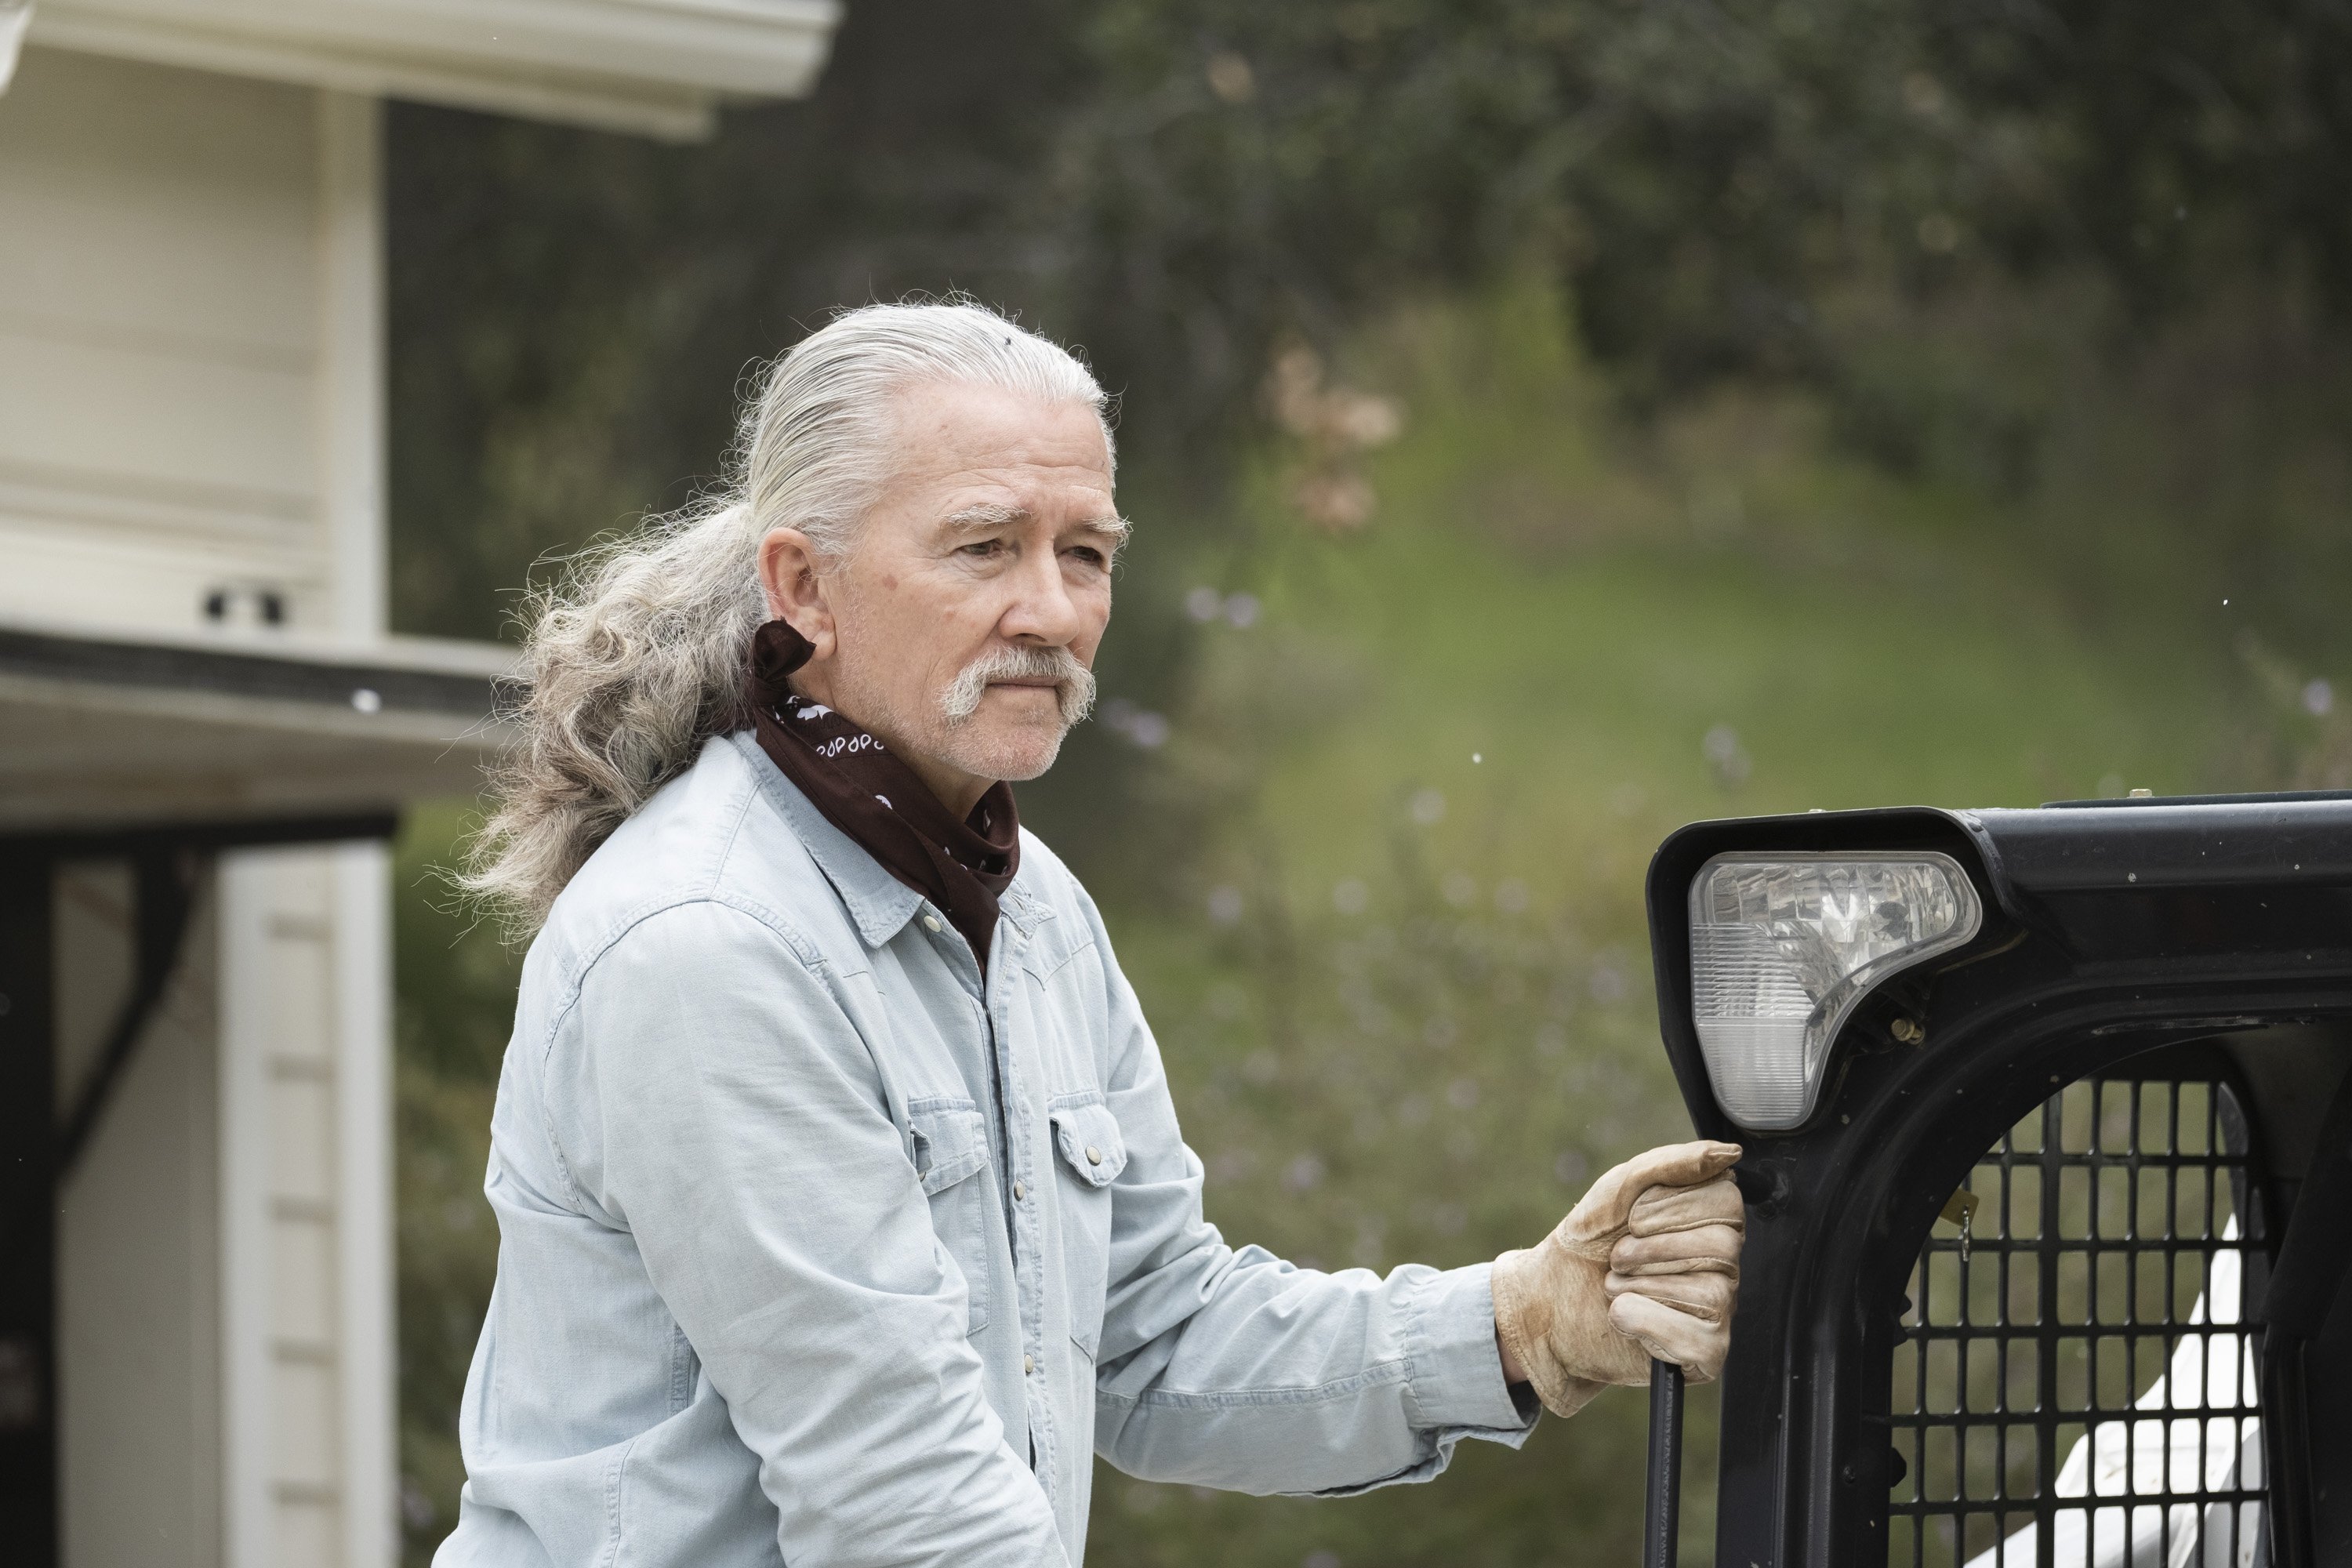 Patrick Duffy playing the role of Terry in ABC’s Season 2 of “Station 19” | Source: Getty Images